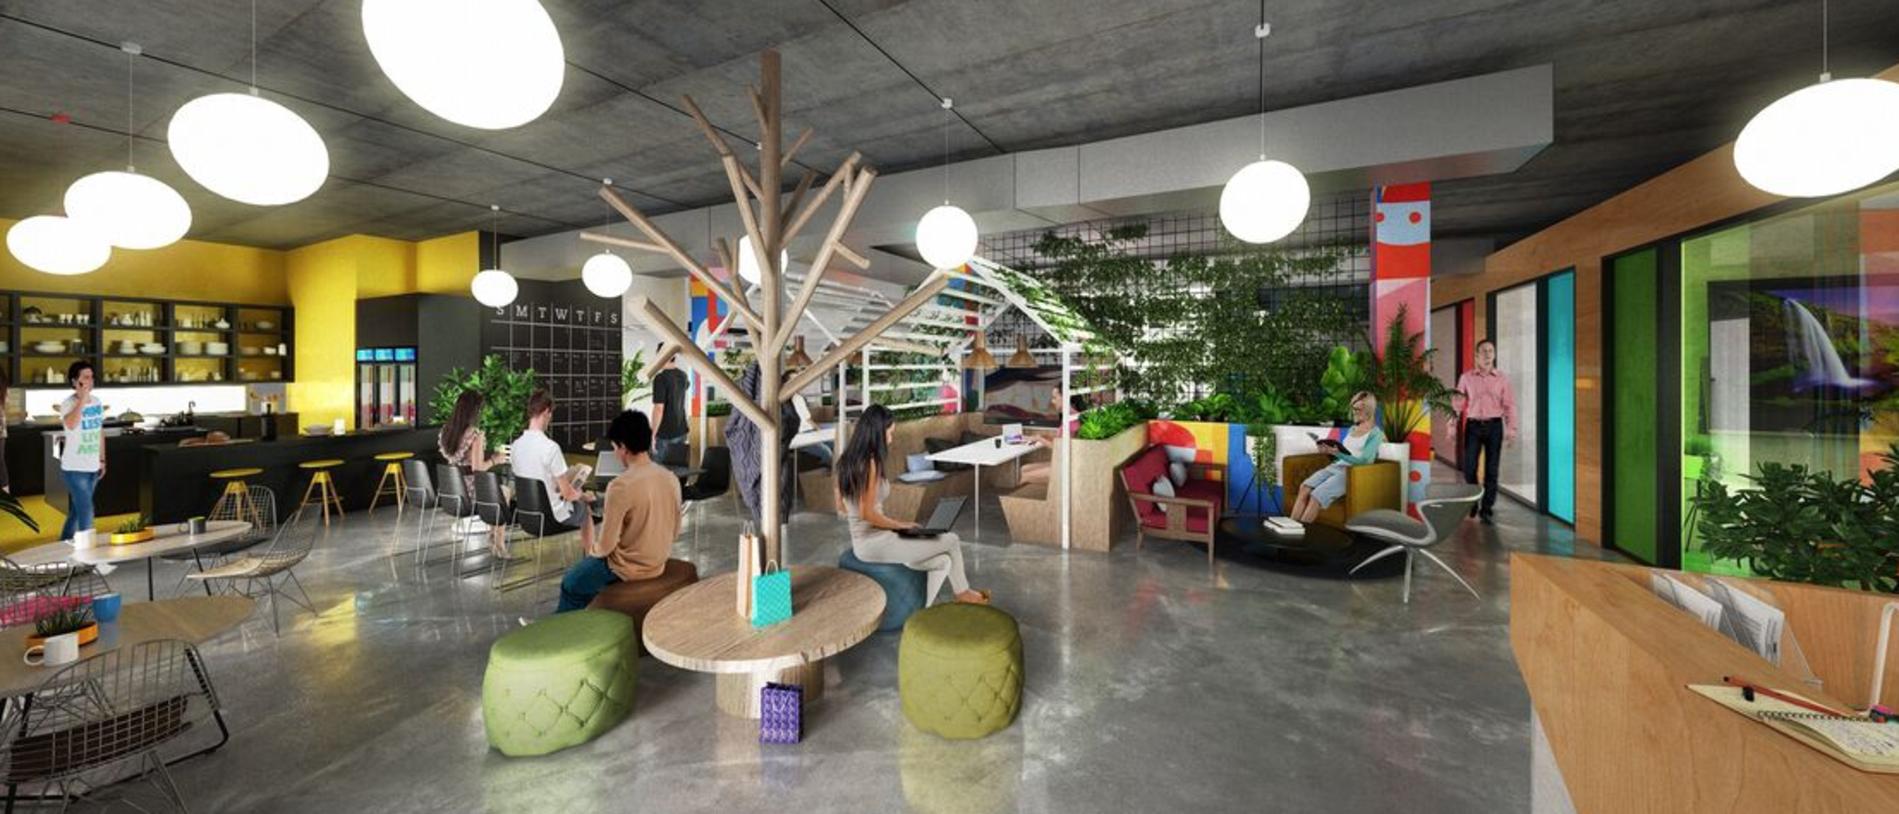 An artist impression of the Cohort co-working space and startup incubator at the Gold Coast Health and Knowledge Precinct.